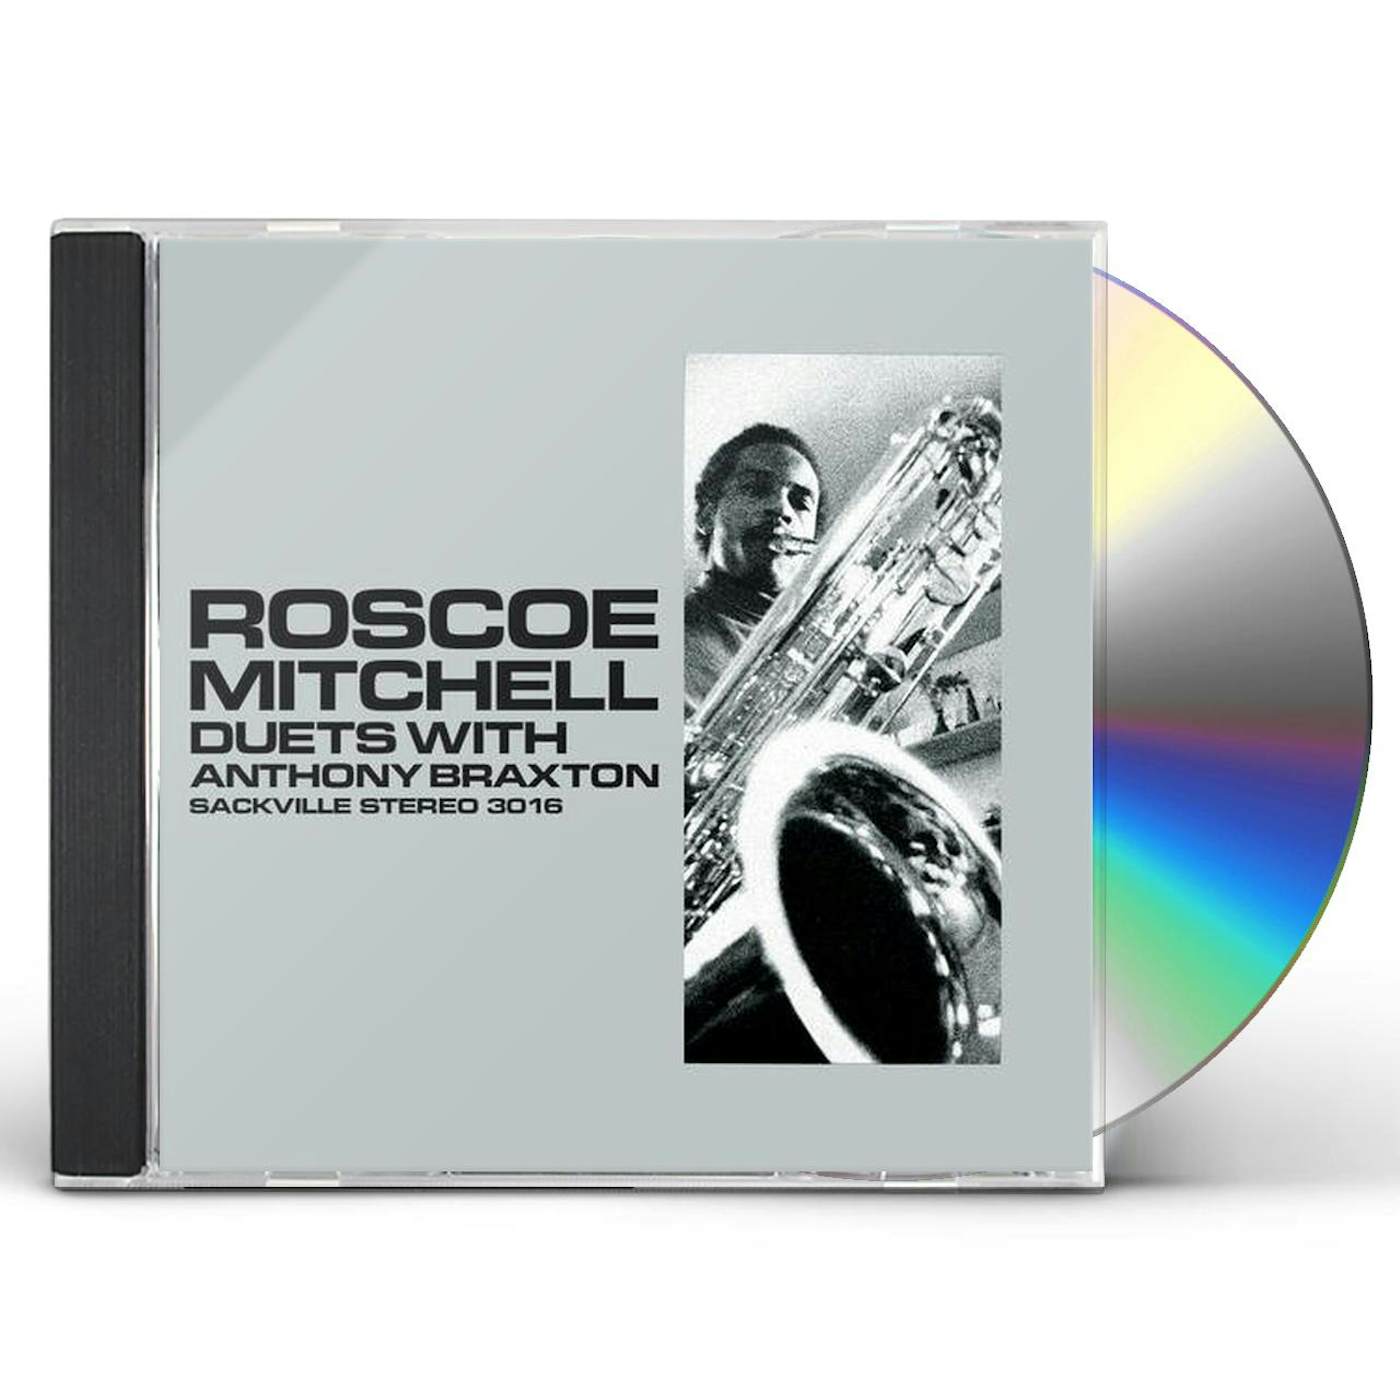 Roscoe Mitchell DUETS WITH ANTHONY BRAXTON CD